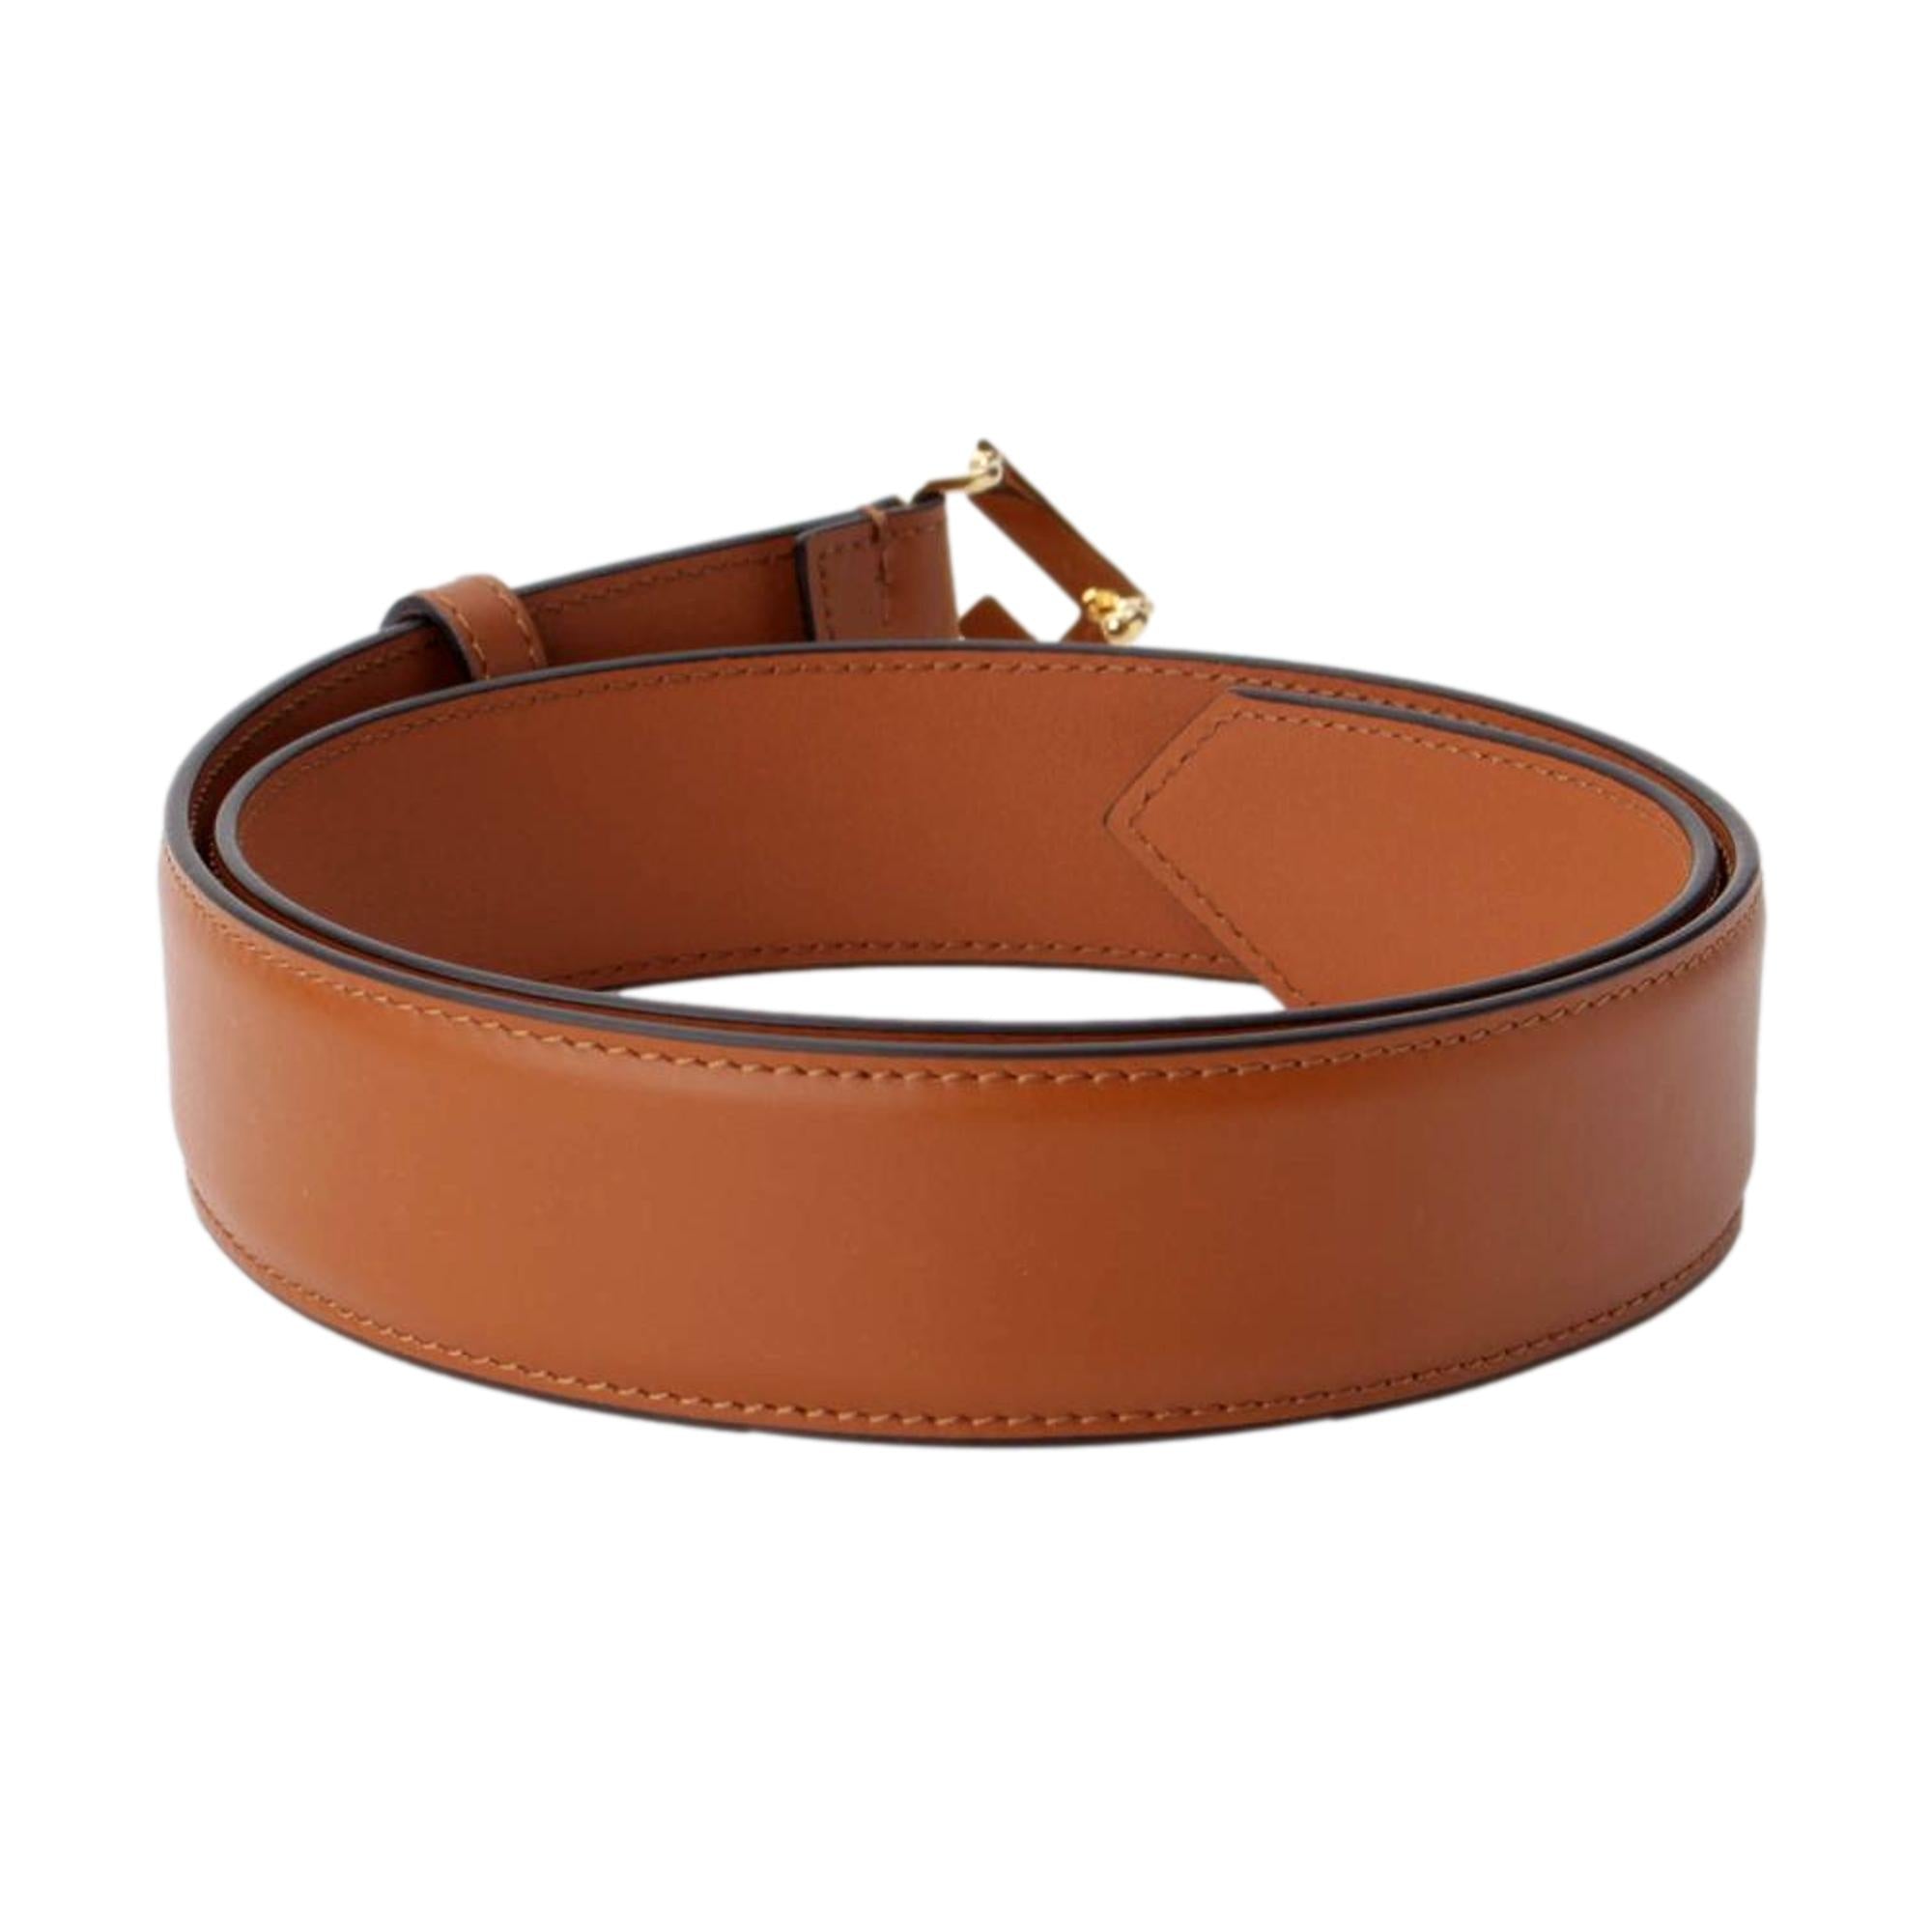 Fendi First Gold Logo Cuoio Brown Calf Leather Belt Size 90